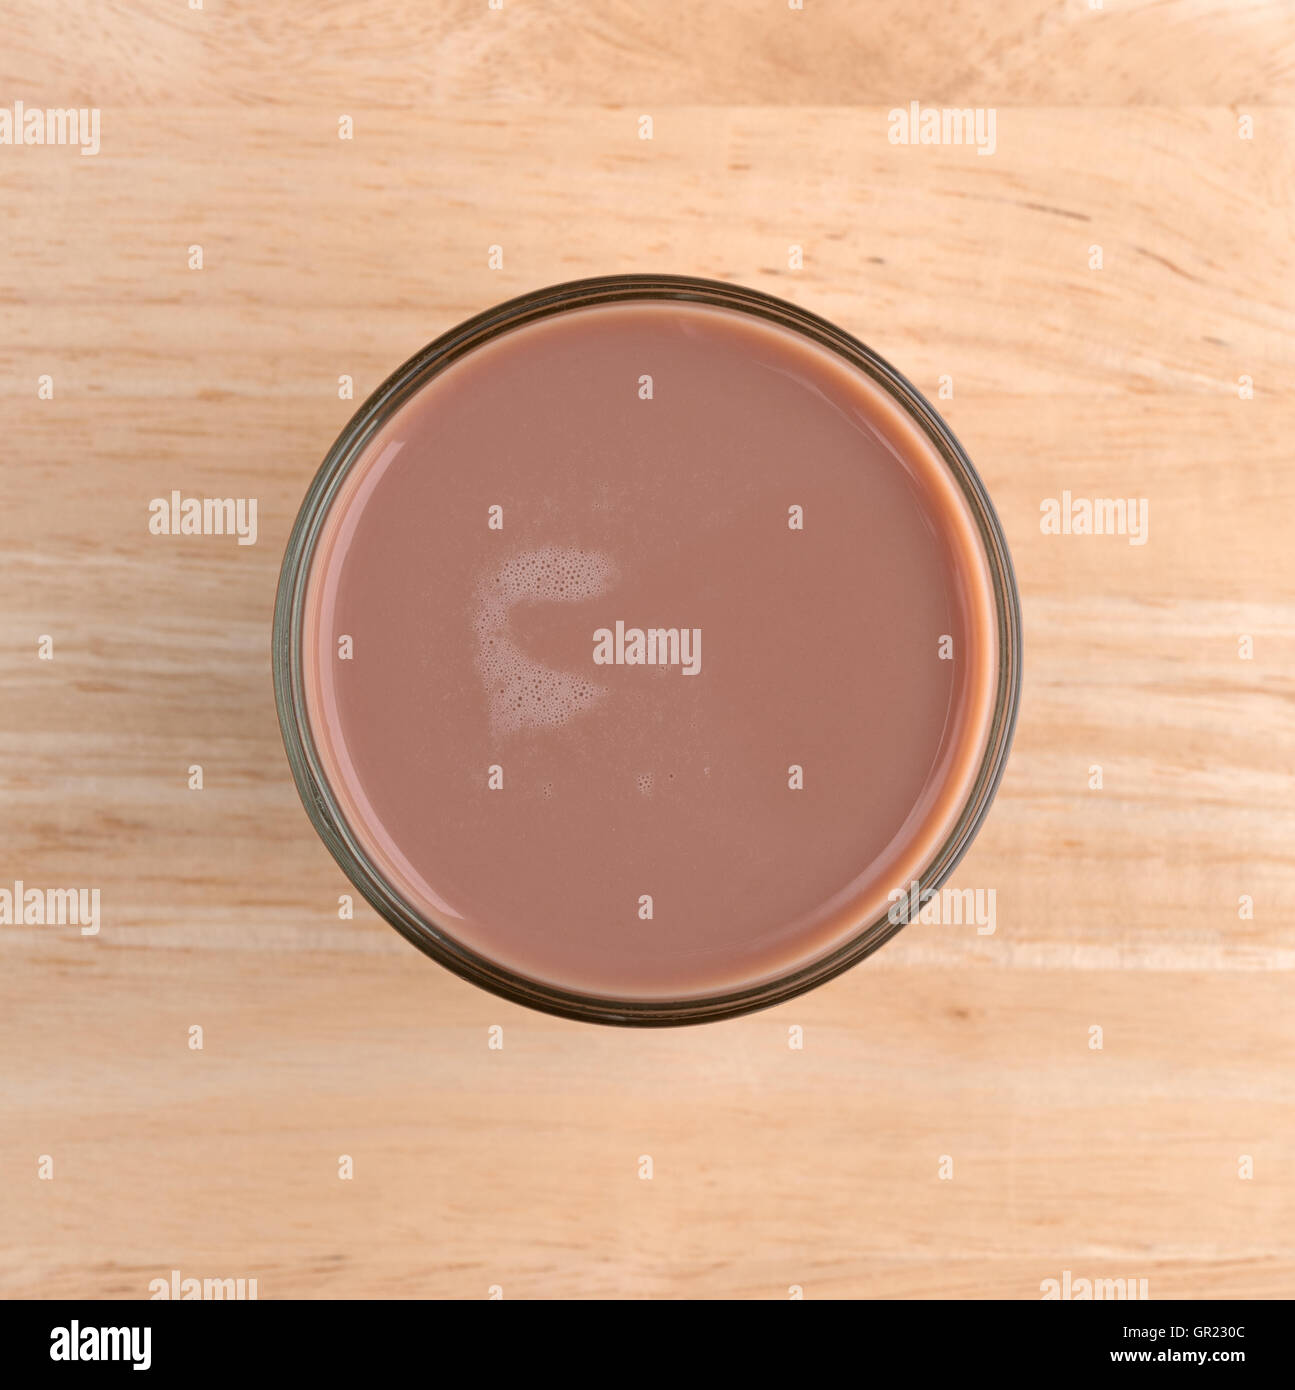 Top view of a glass of chocolate milk on a wood table. Stock Photo